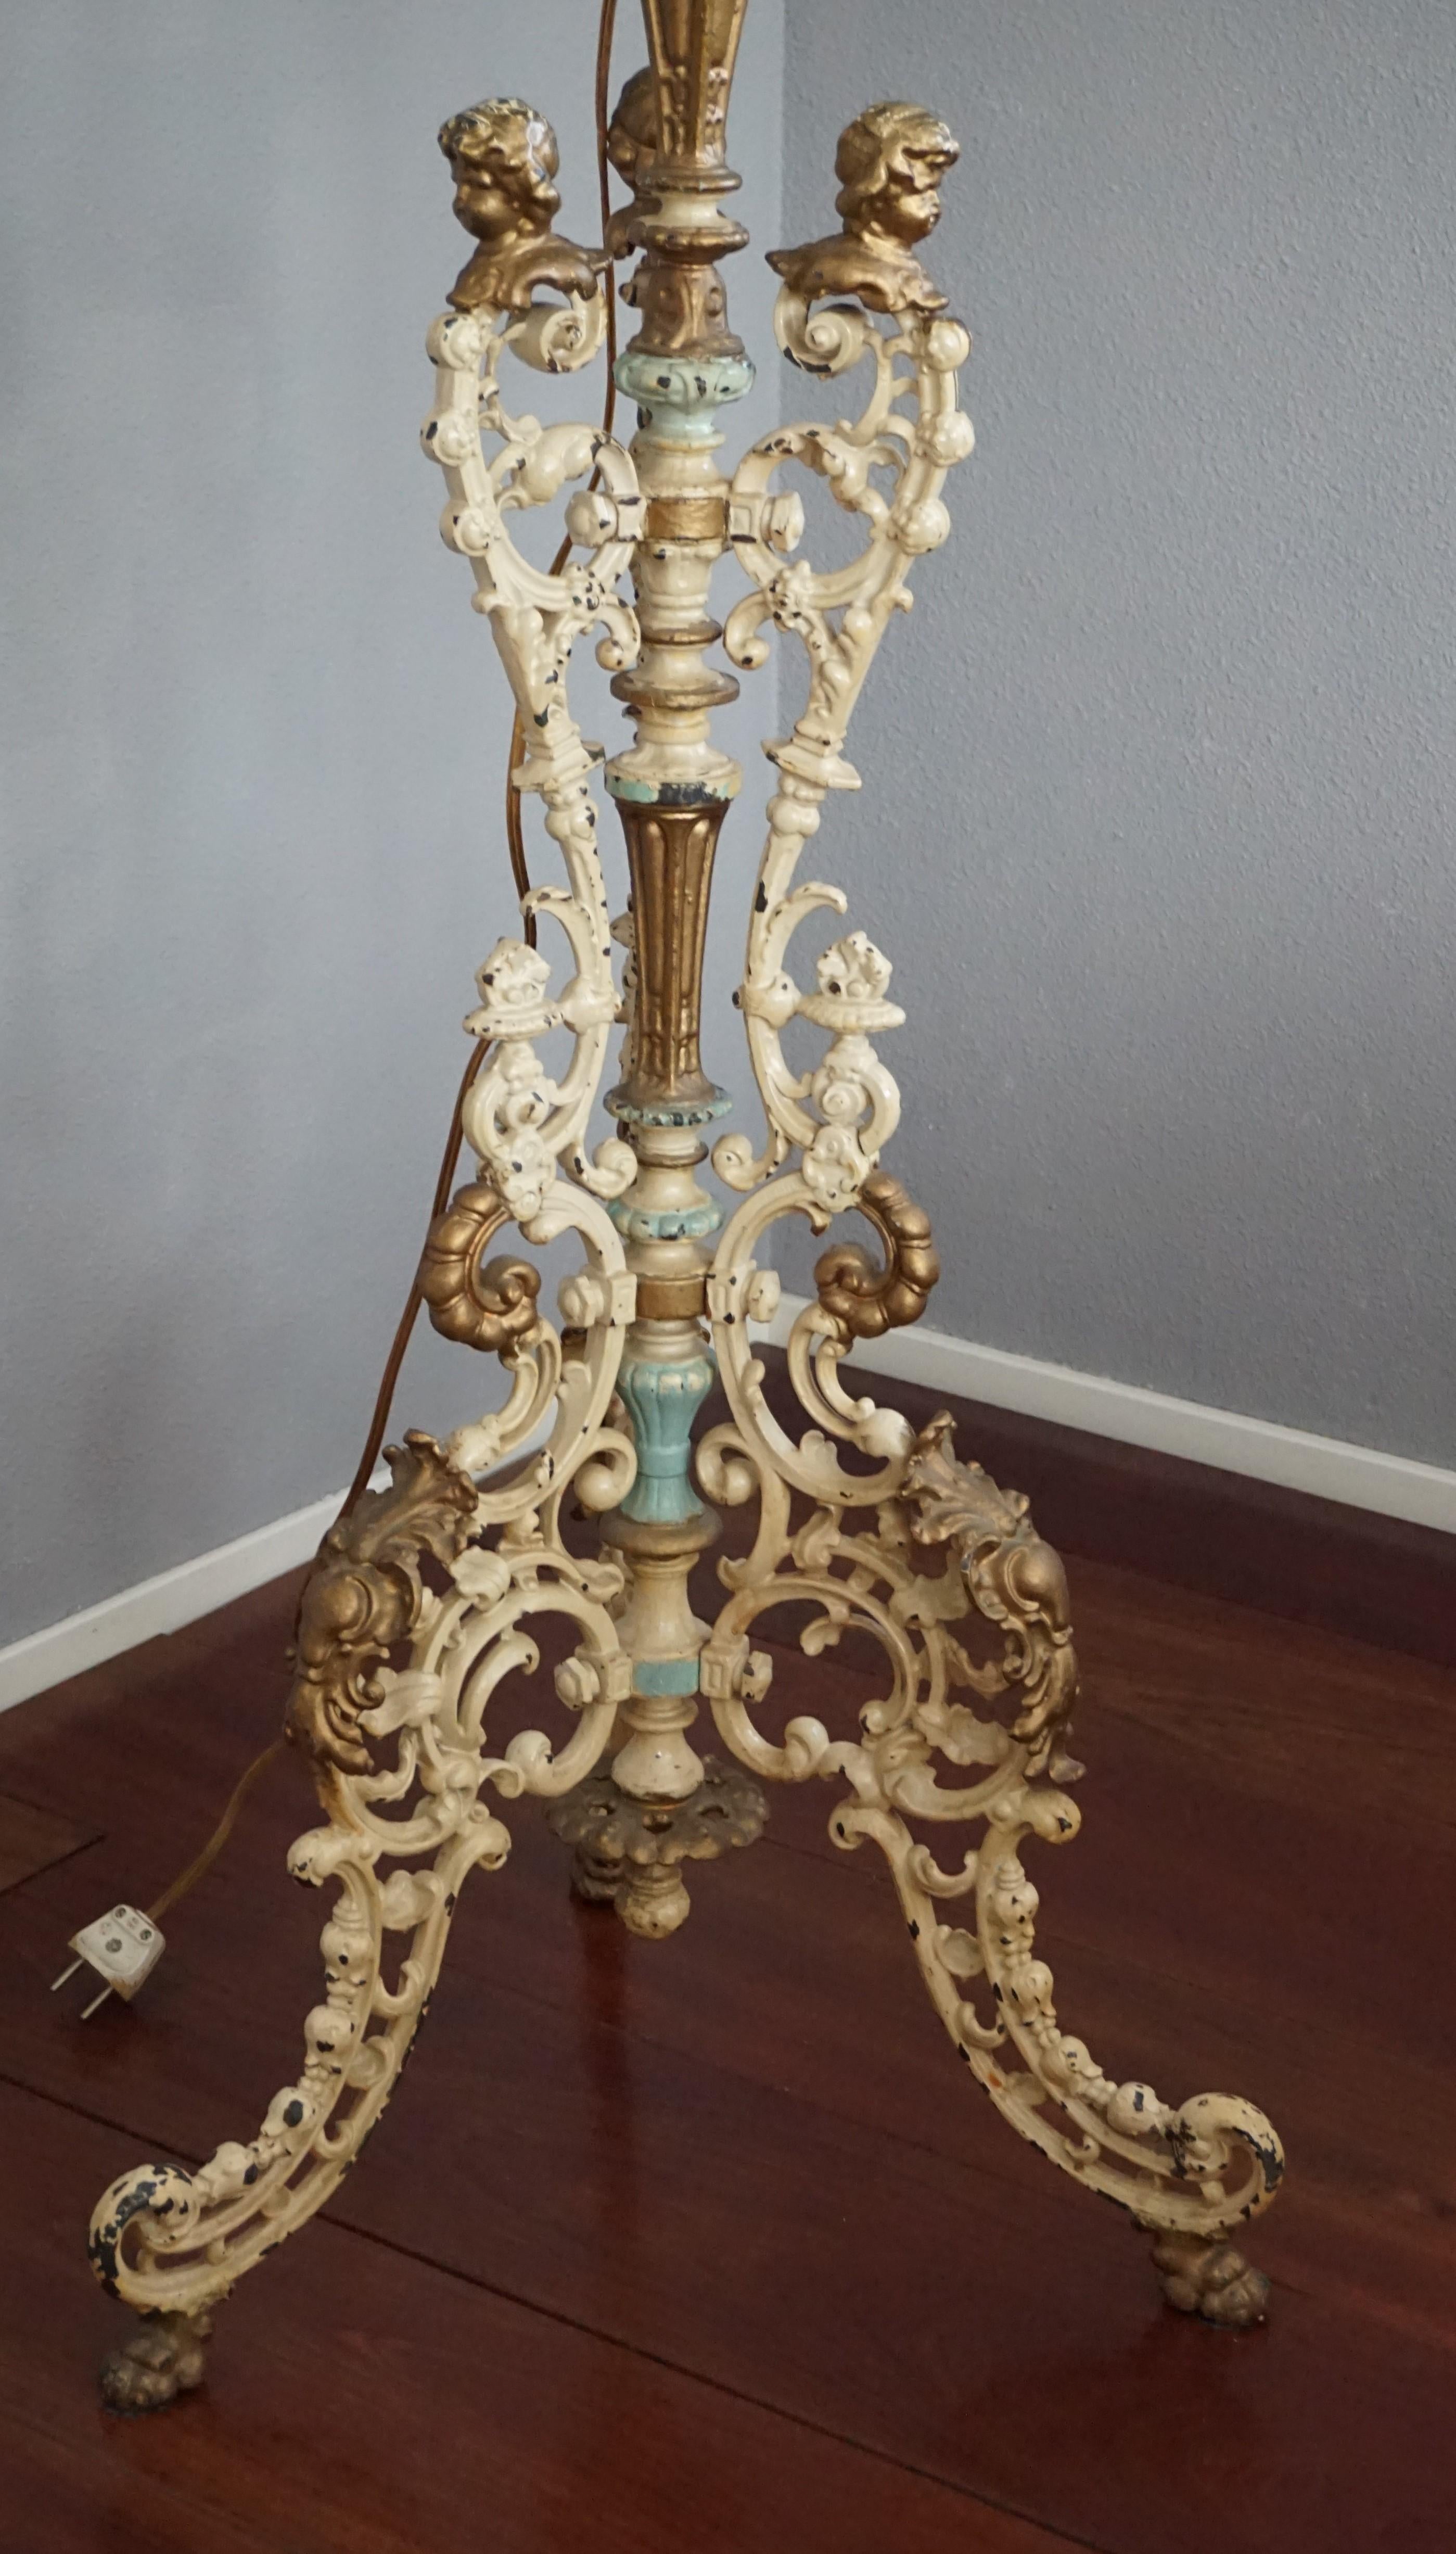 19th Century Antique and Painted Cast Iron Baroque Revival Floor Lamp w. Putti Bust Sculpture For Sale